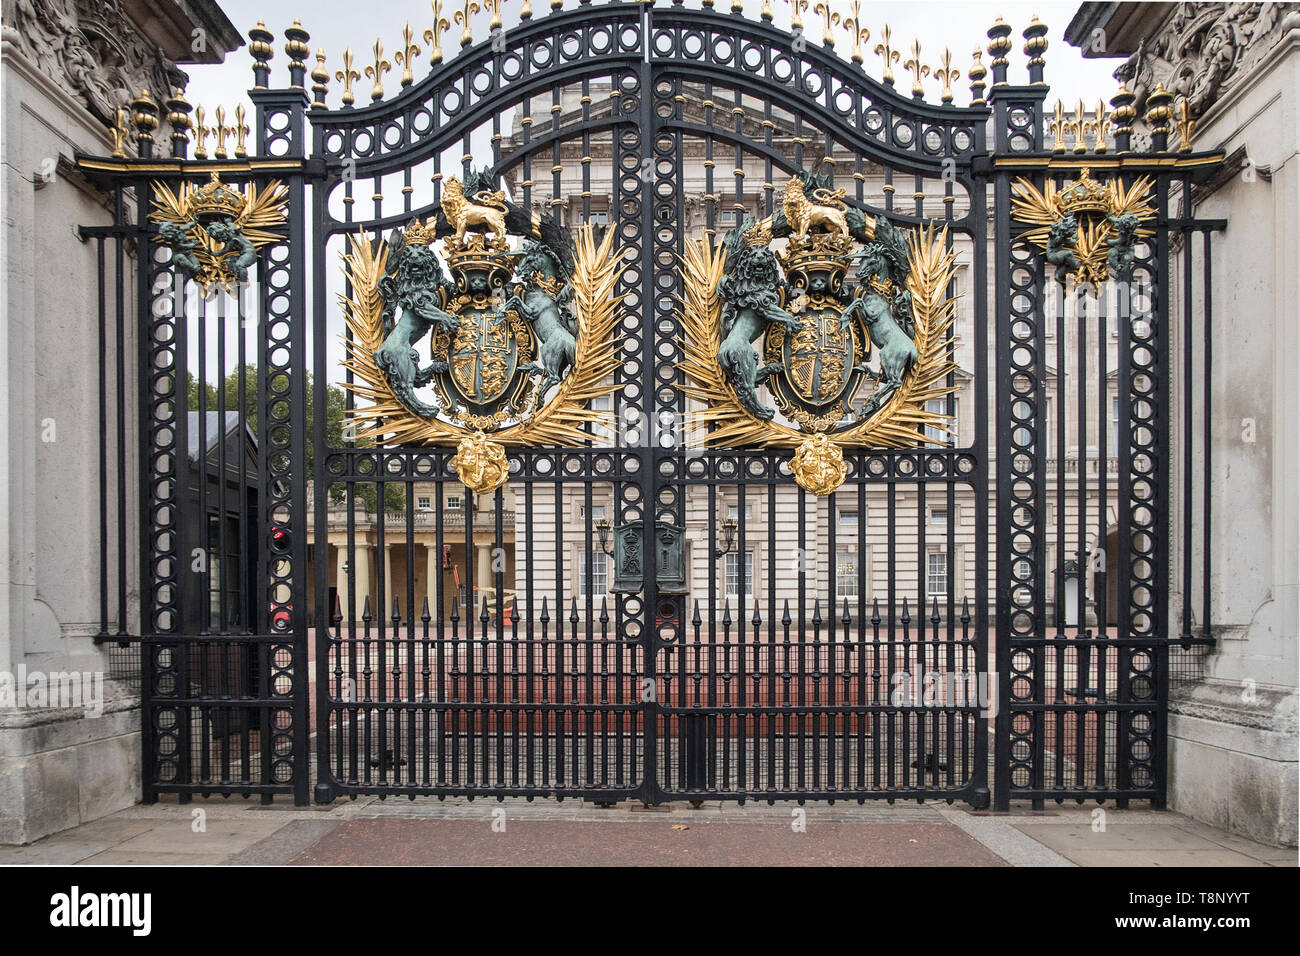 London, United Kingdom - October 11, 2018; Close up of the Gate of Buckingham palace with rich golden ornaments Stock Photo